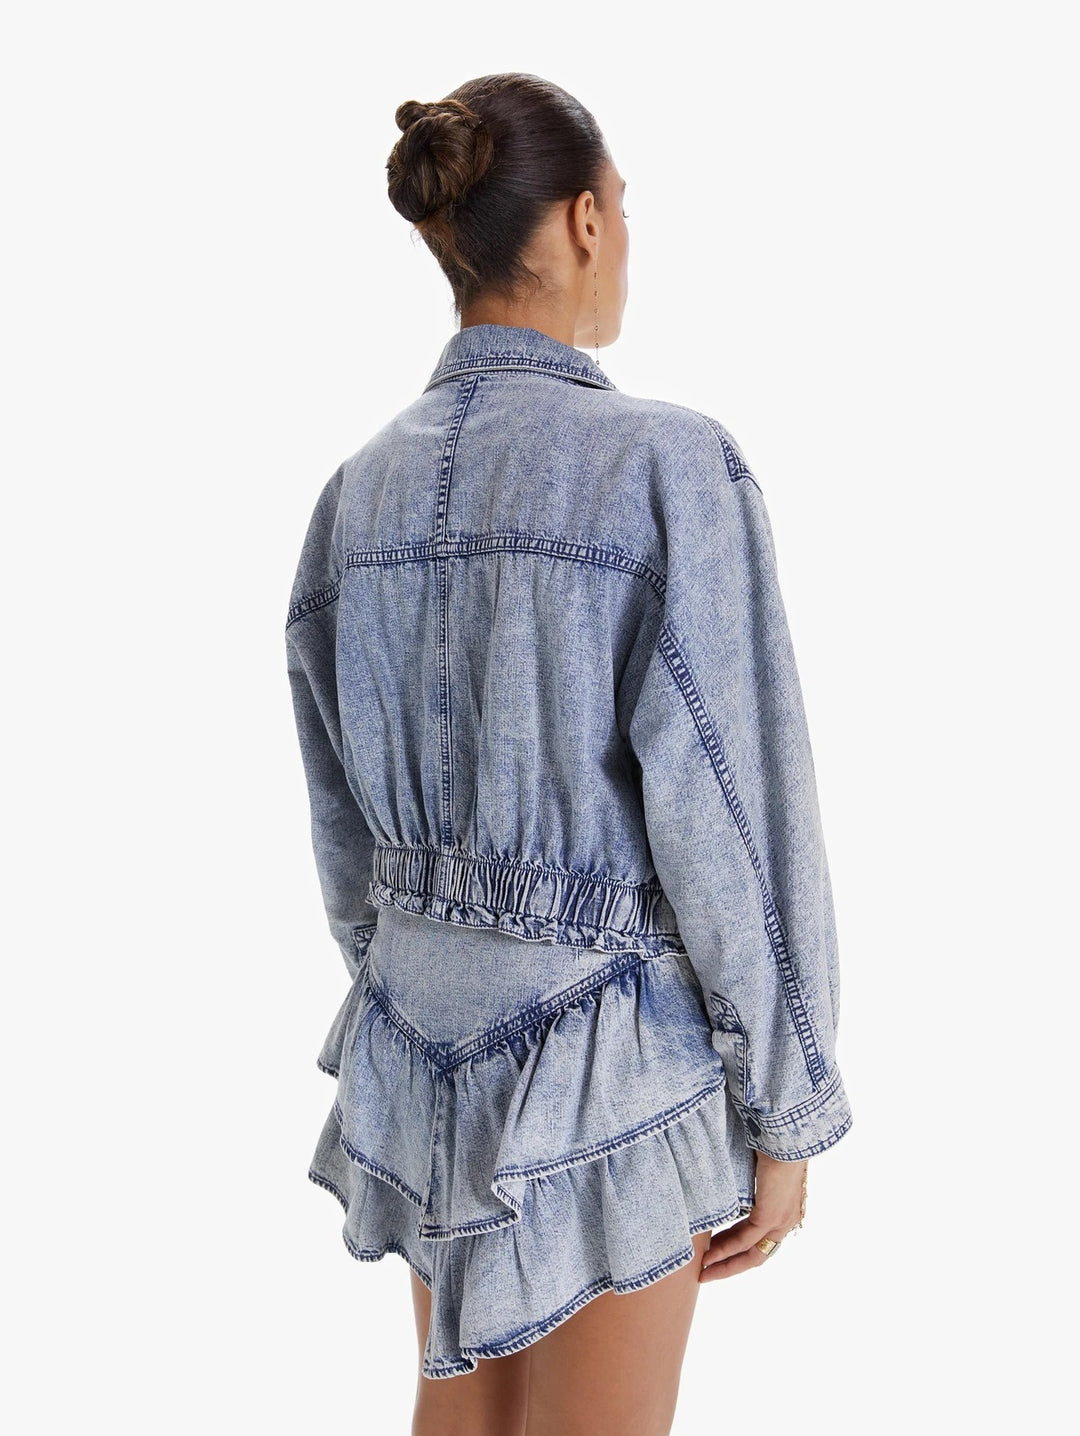 Mother - The Fly Away Ruffle Jacket in Threading the Needle